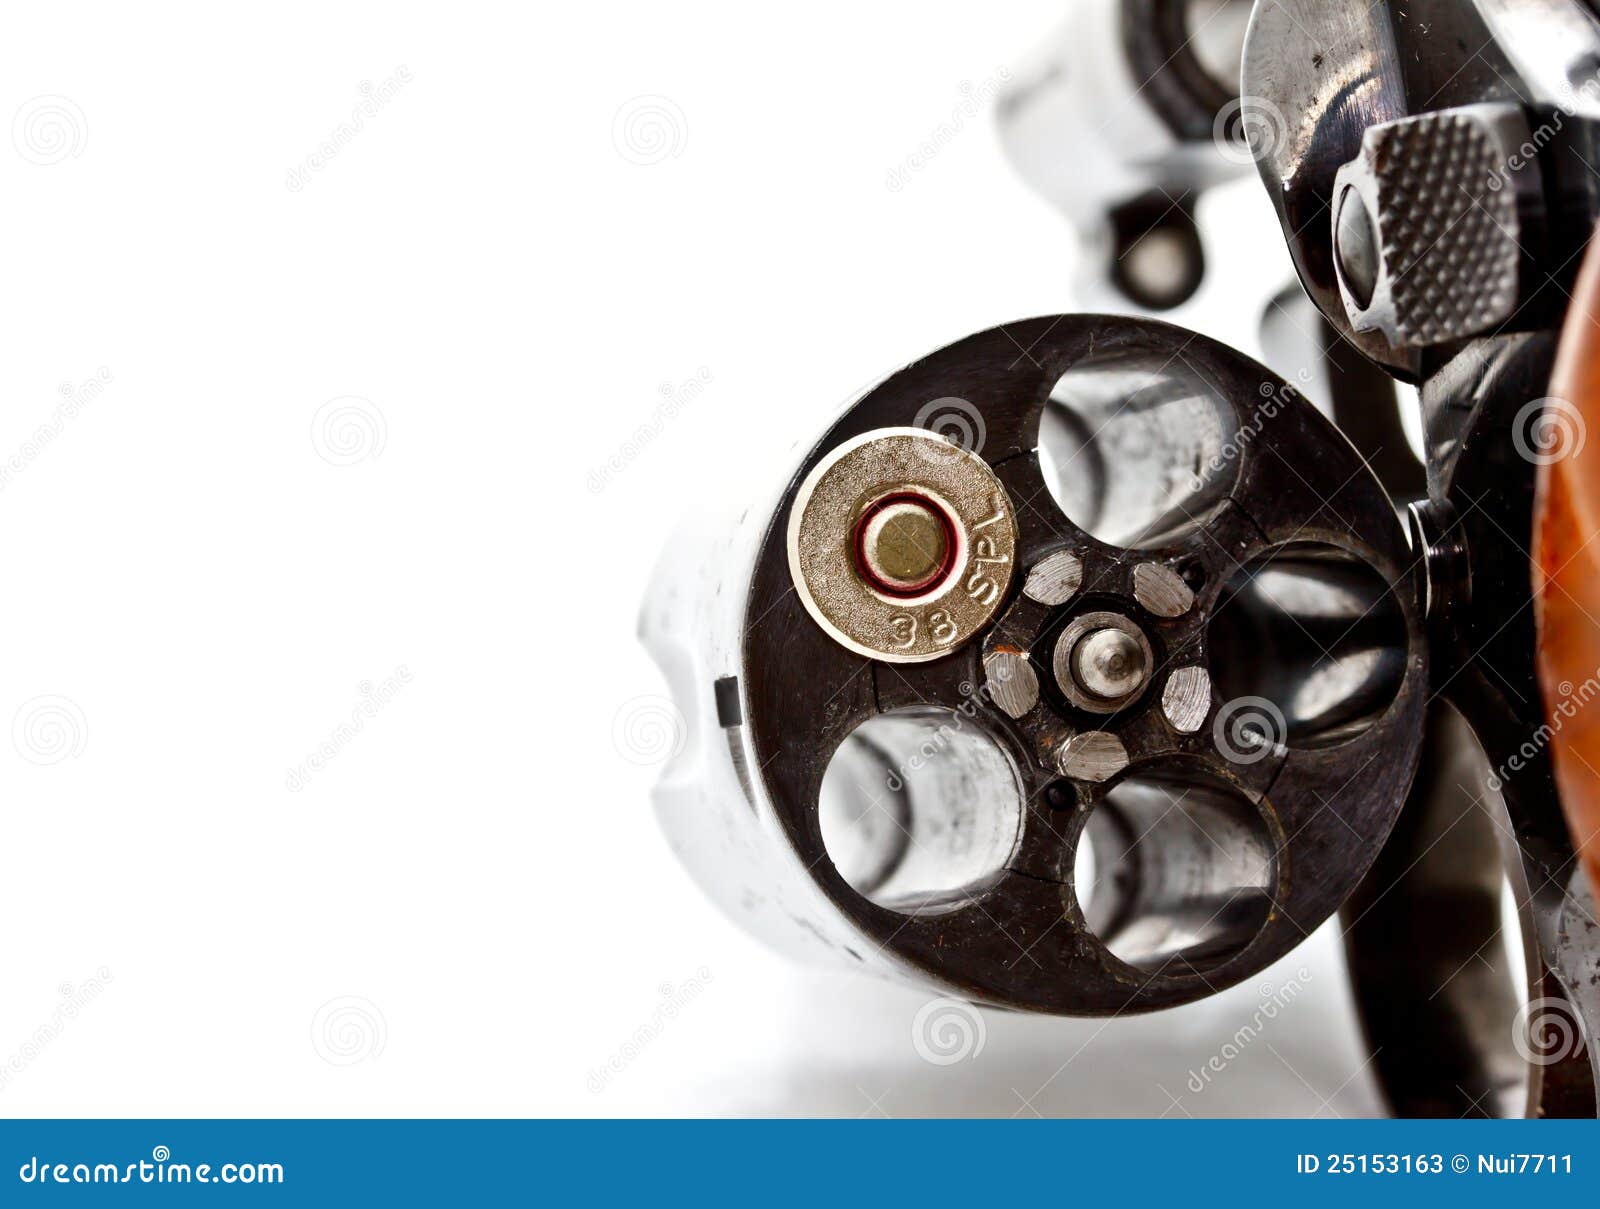 Russian roulette concept stock image. Image of business - 34525783